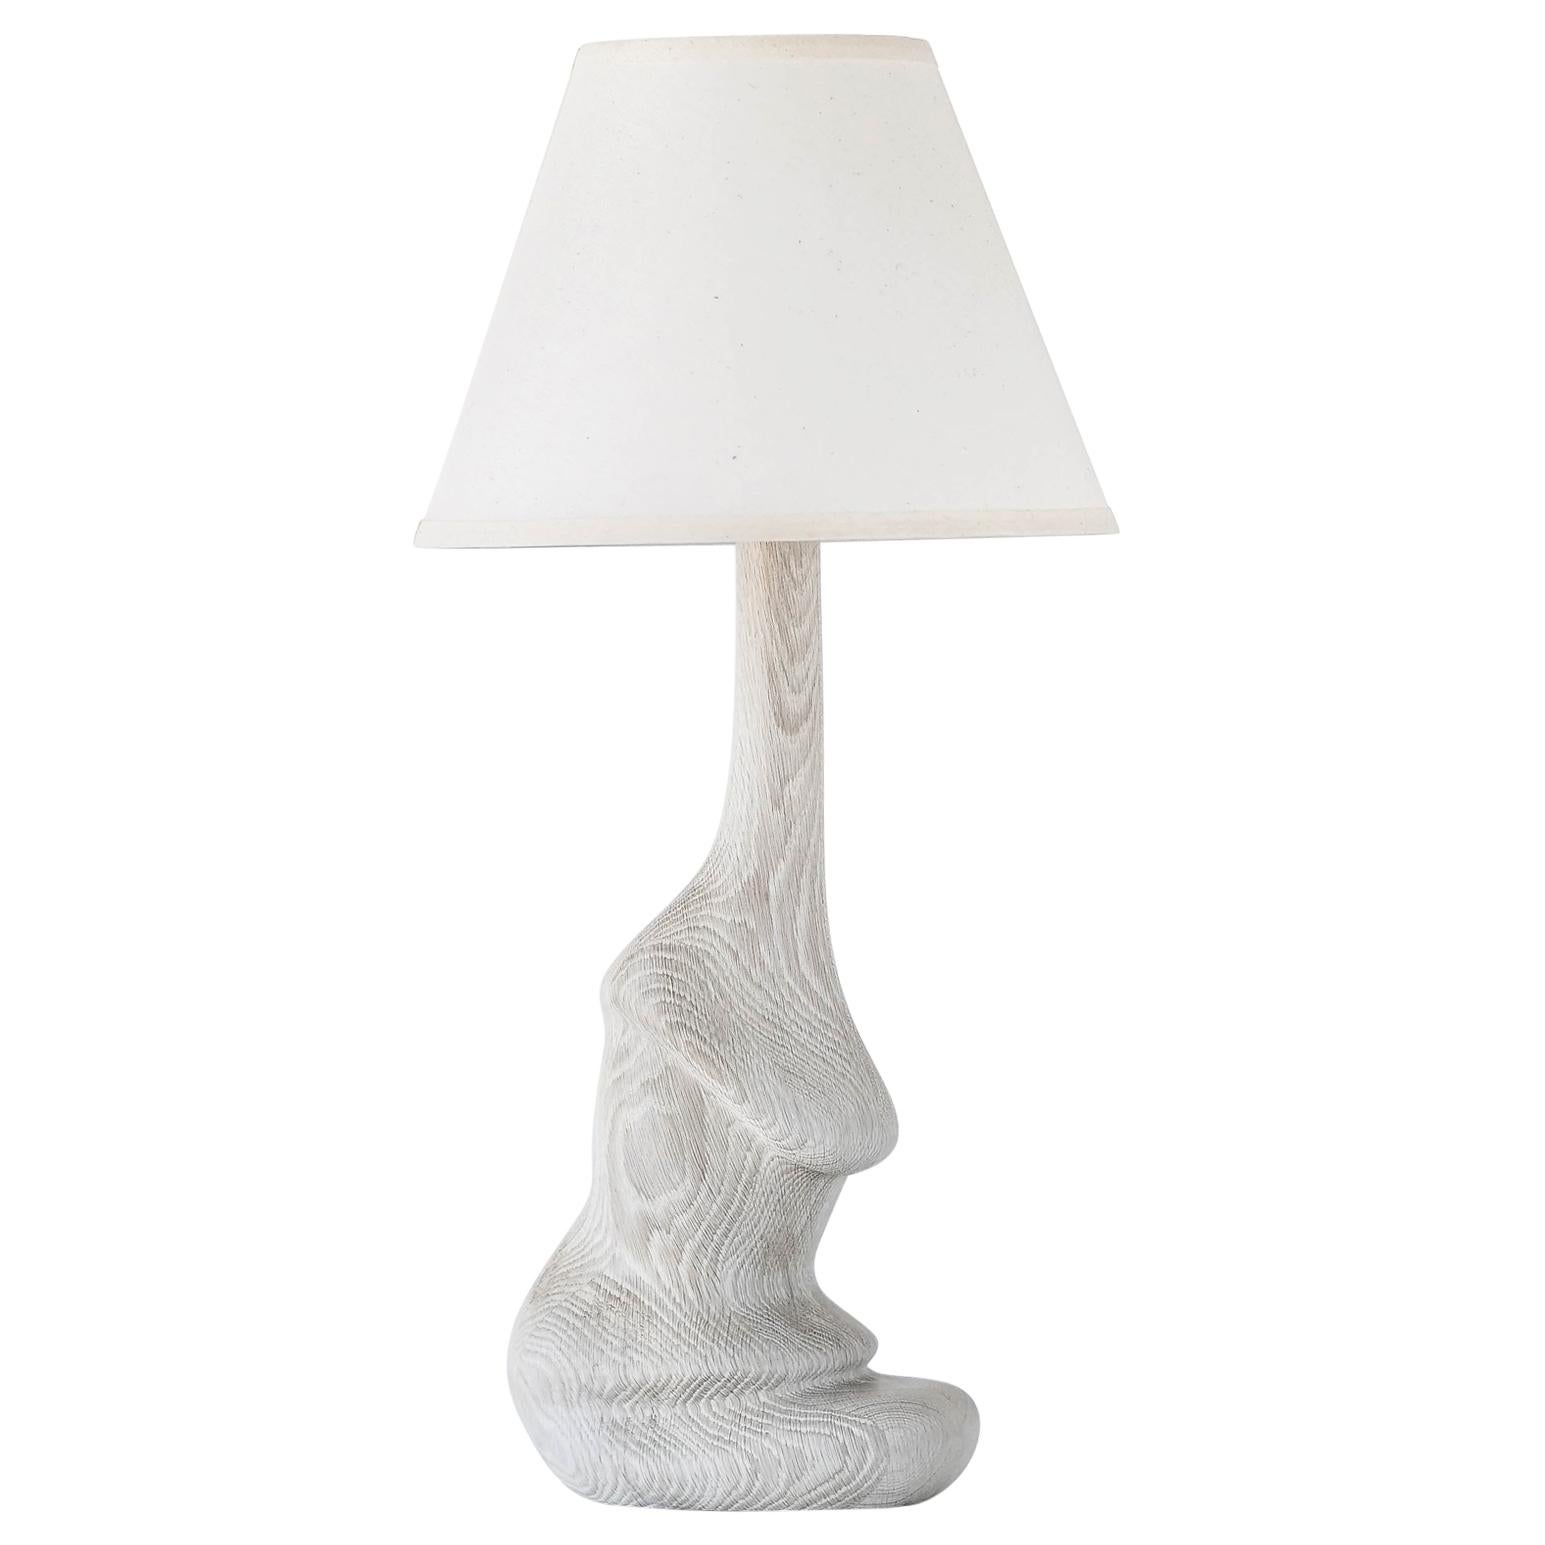 Carved Solid White Oakwood Fungi Organic Table Lamp with White Linen Lamp Shade For Sale